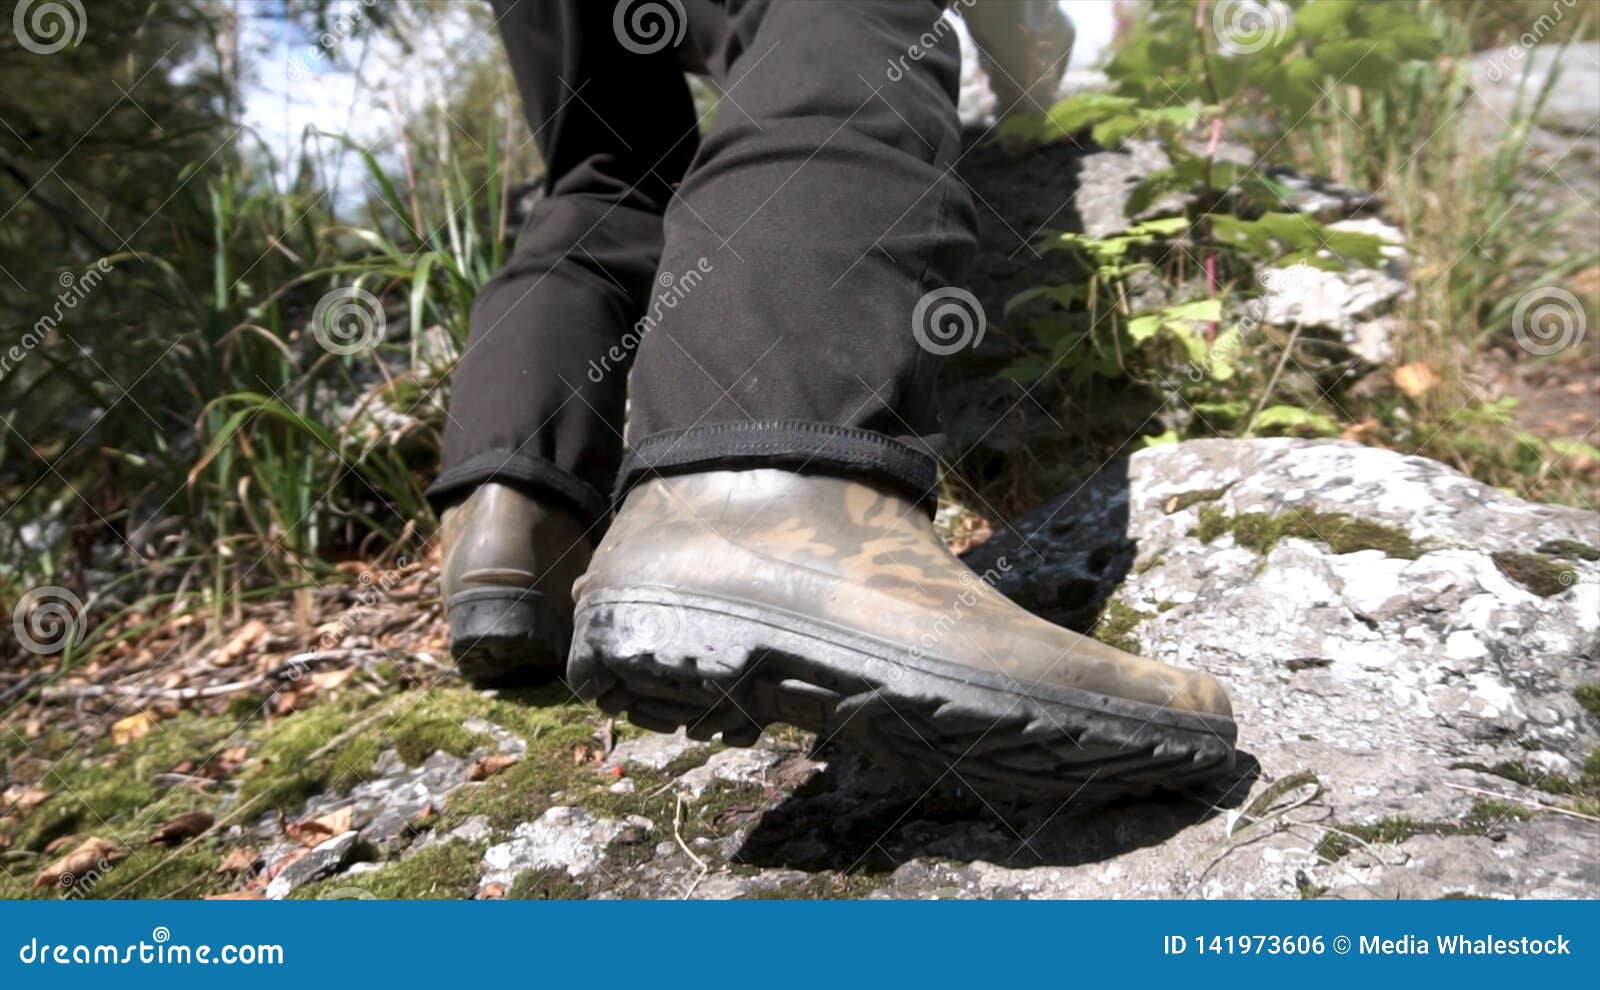 rubber boots hiking